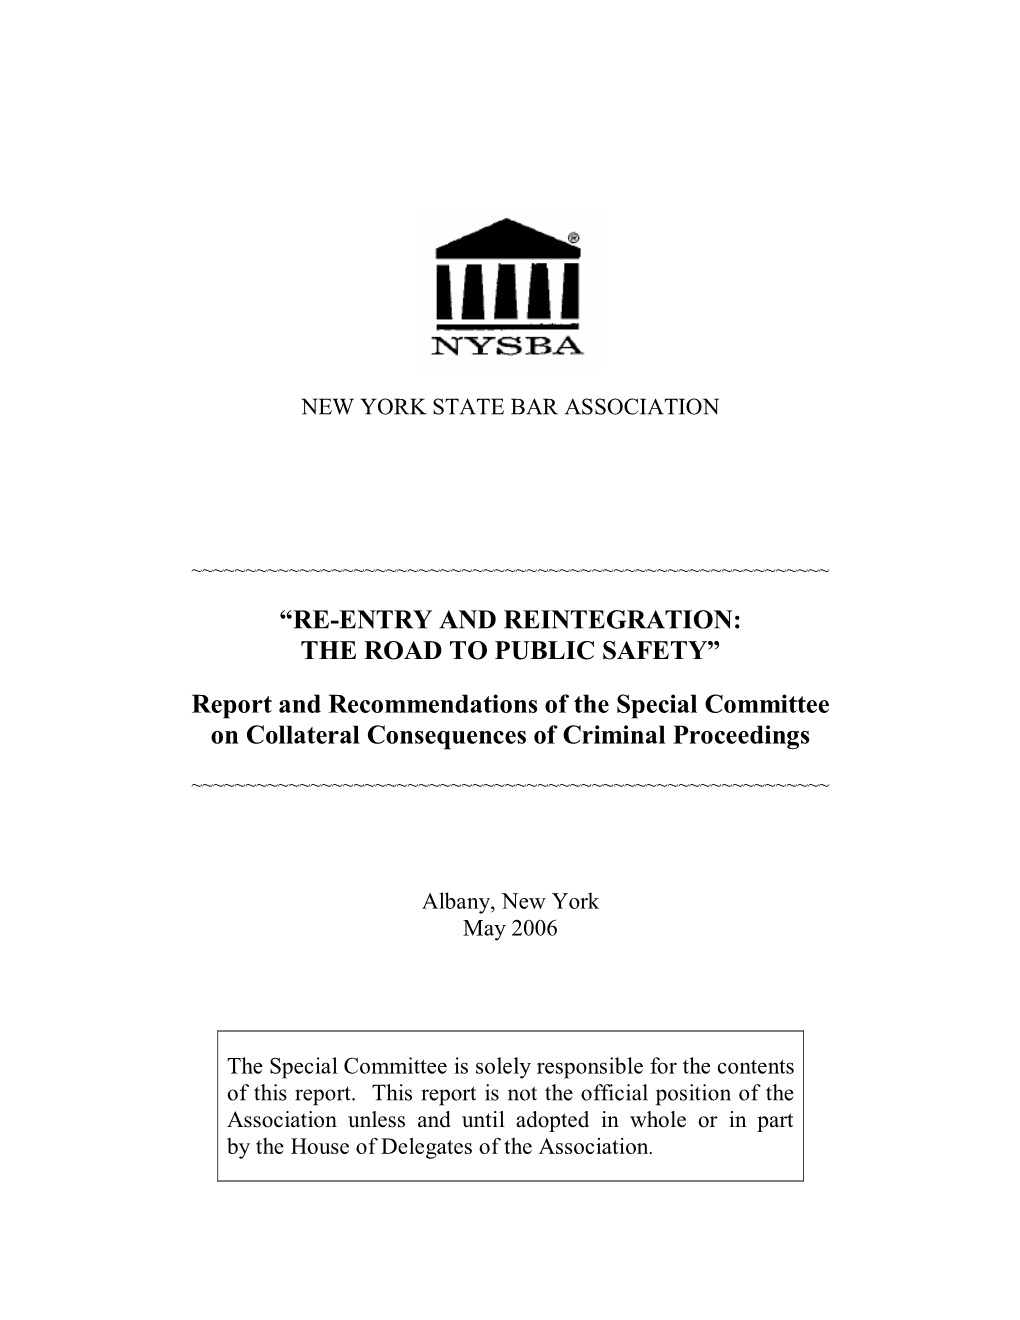 “Re-Entry and Reintegration: the Road to Public Safety”